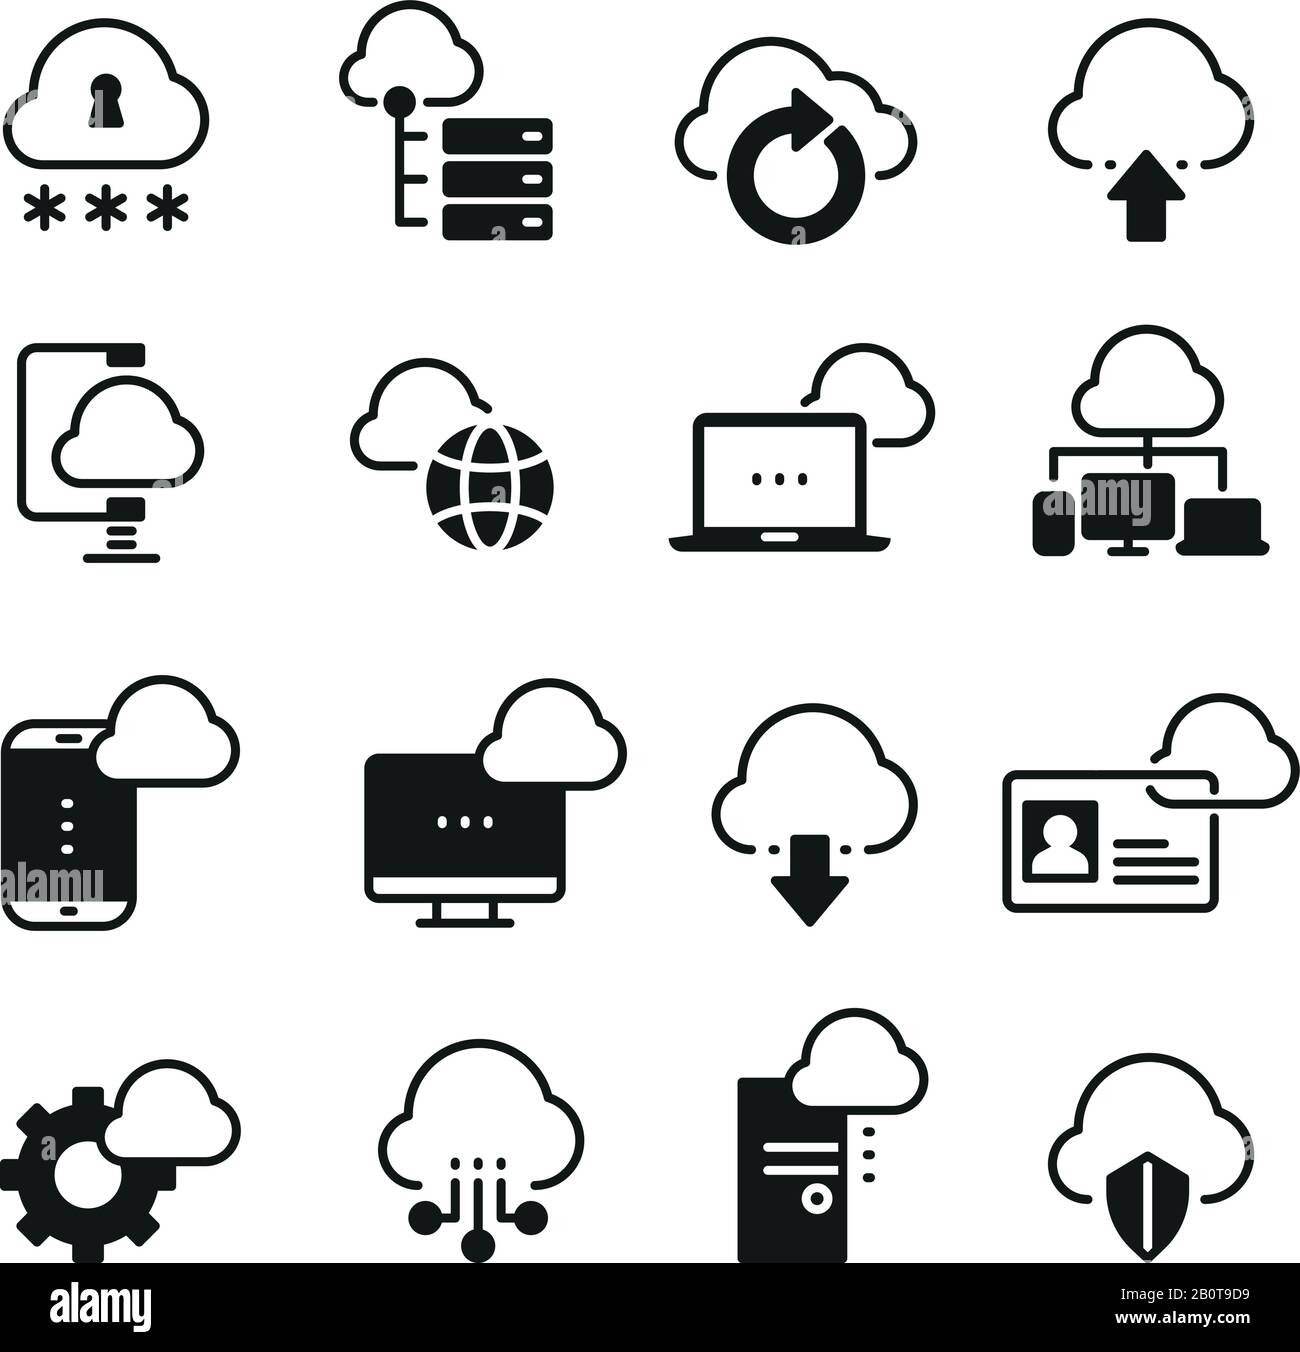 Internet cloud computing vector icon set. Download database from cloud, illustration of network cloud protection Stock Vector